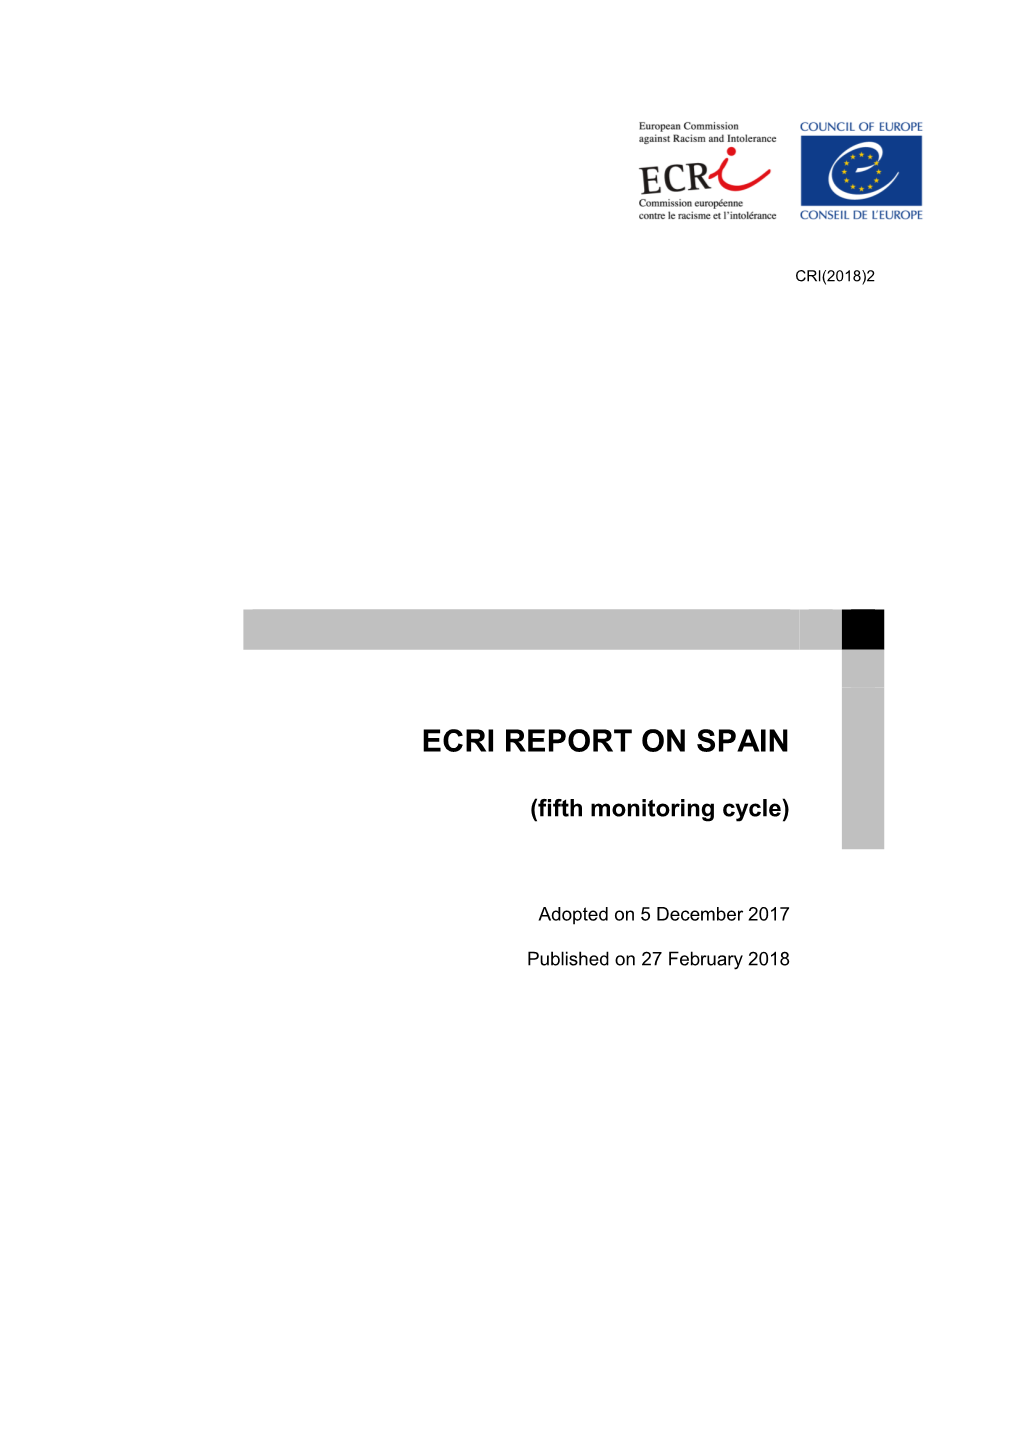 ECRI REPORT on SPAIN (Fifth Monitoring Cycle)